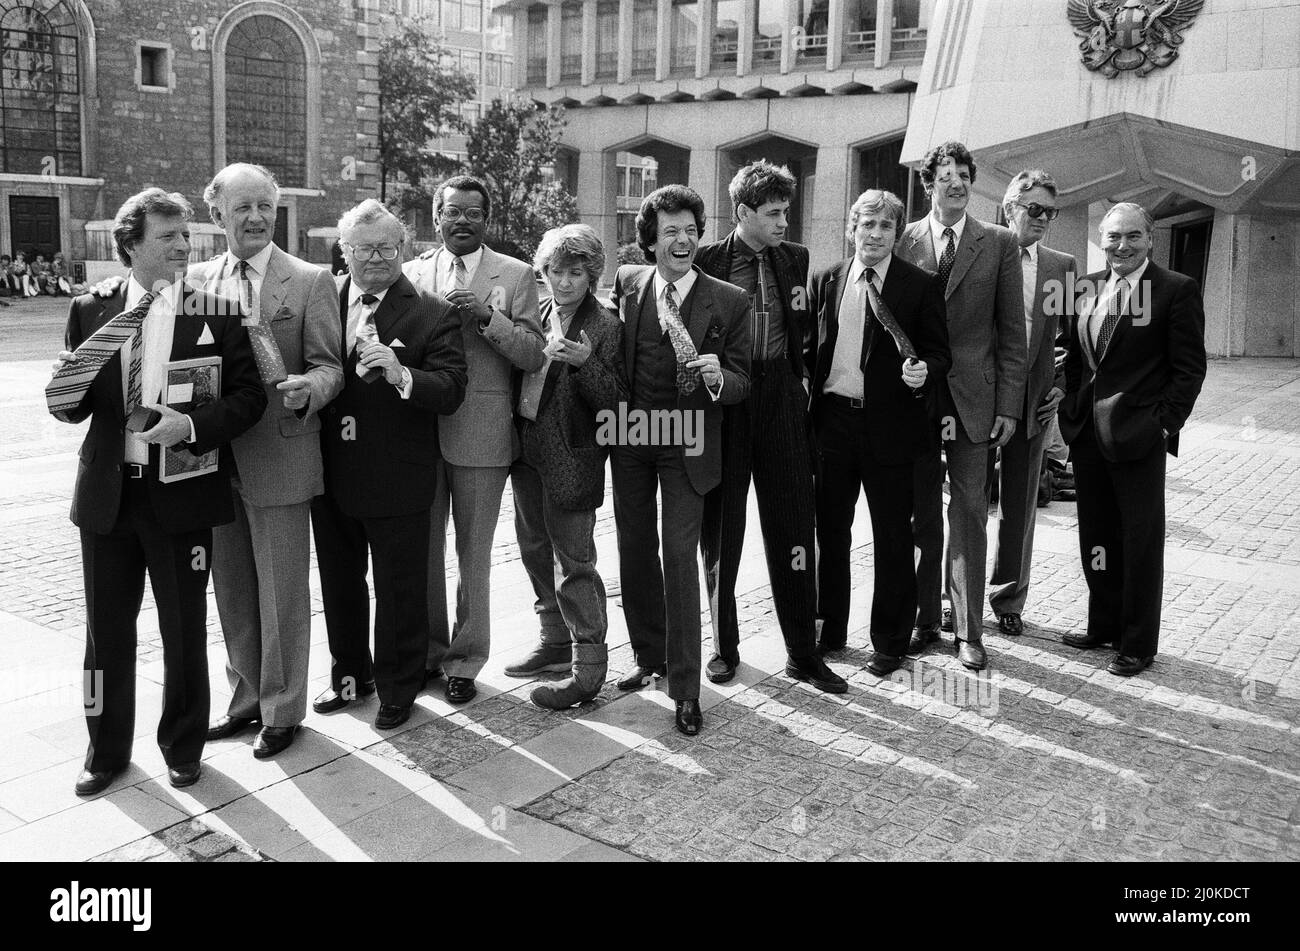 Tie Man of the Year Competition at the Guildhall. All the winners pose for a photograph, the group includes Johnny Briggs, Sir Harry Secombe, Trevor McDonald, Victoria Wood, Lionel Blair, Bob Geldof, Steve Smith, Chris Searle, Sir Peter Parker.  30th September 1982. Stock Photo